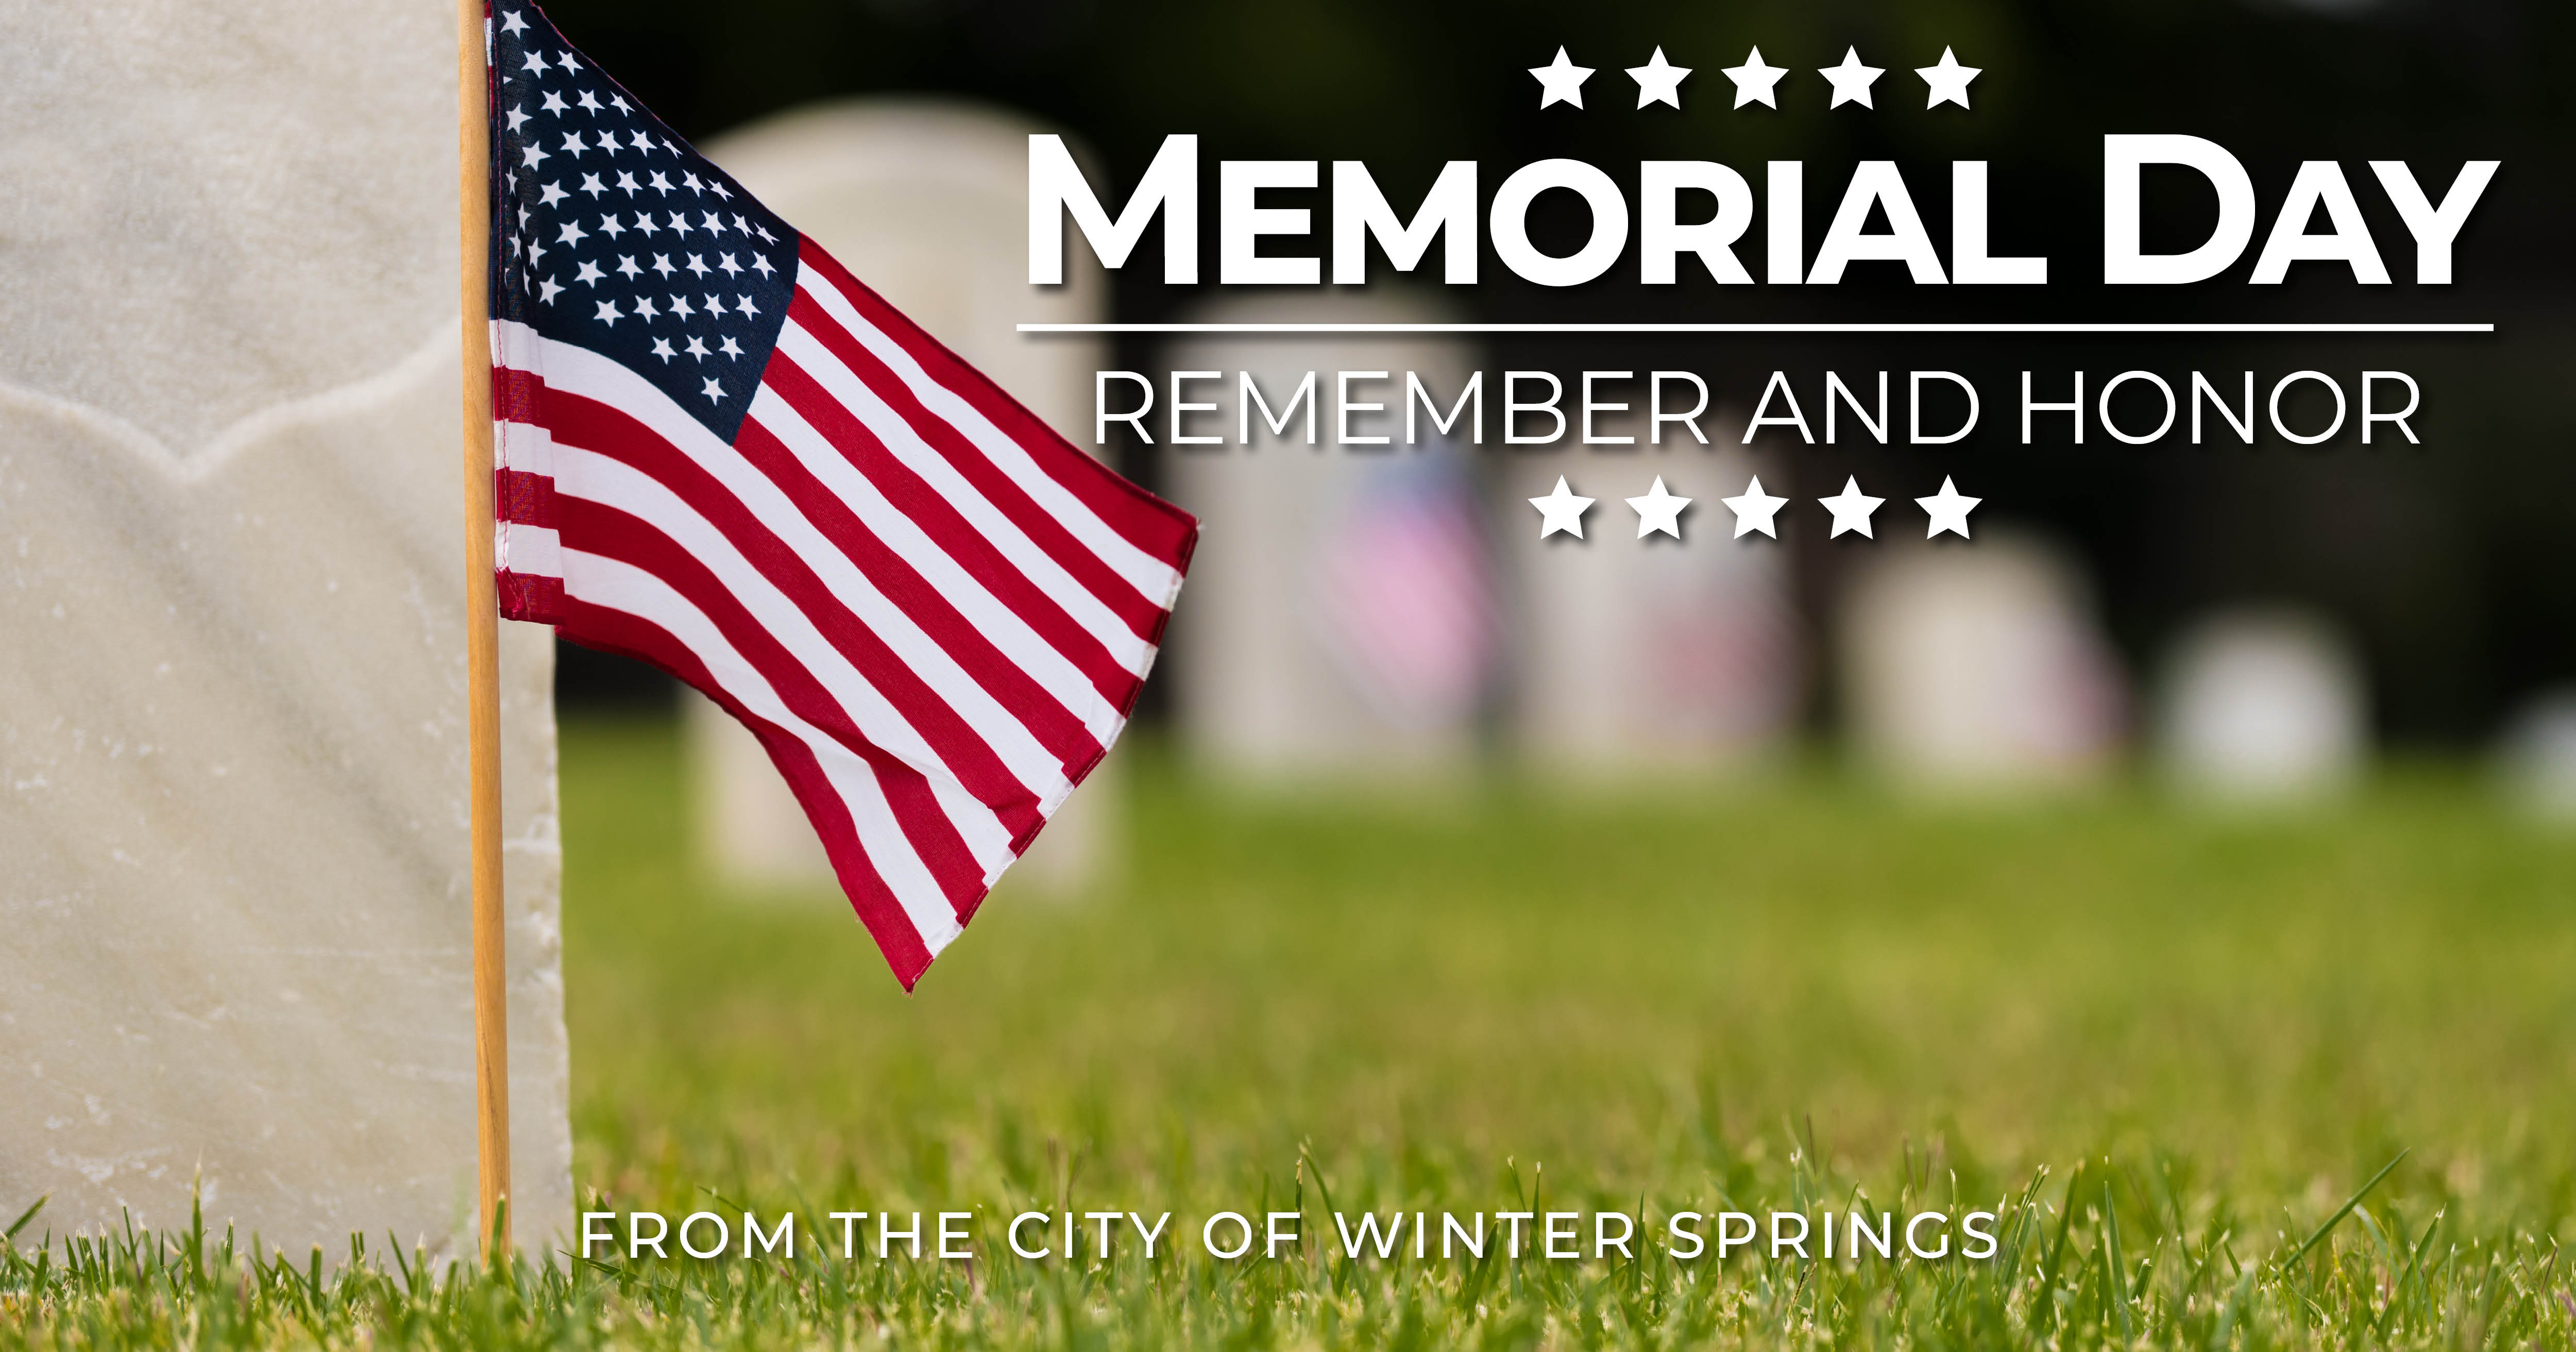 city-offices-closed-memorial-day-2021-winter-springs-florida